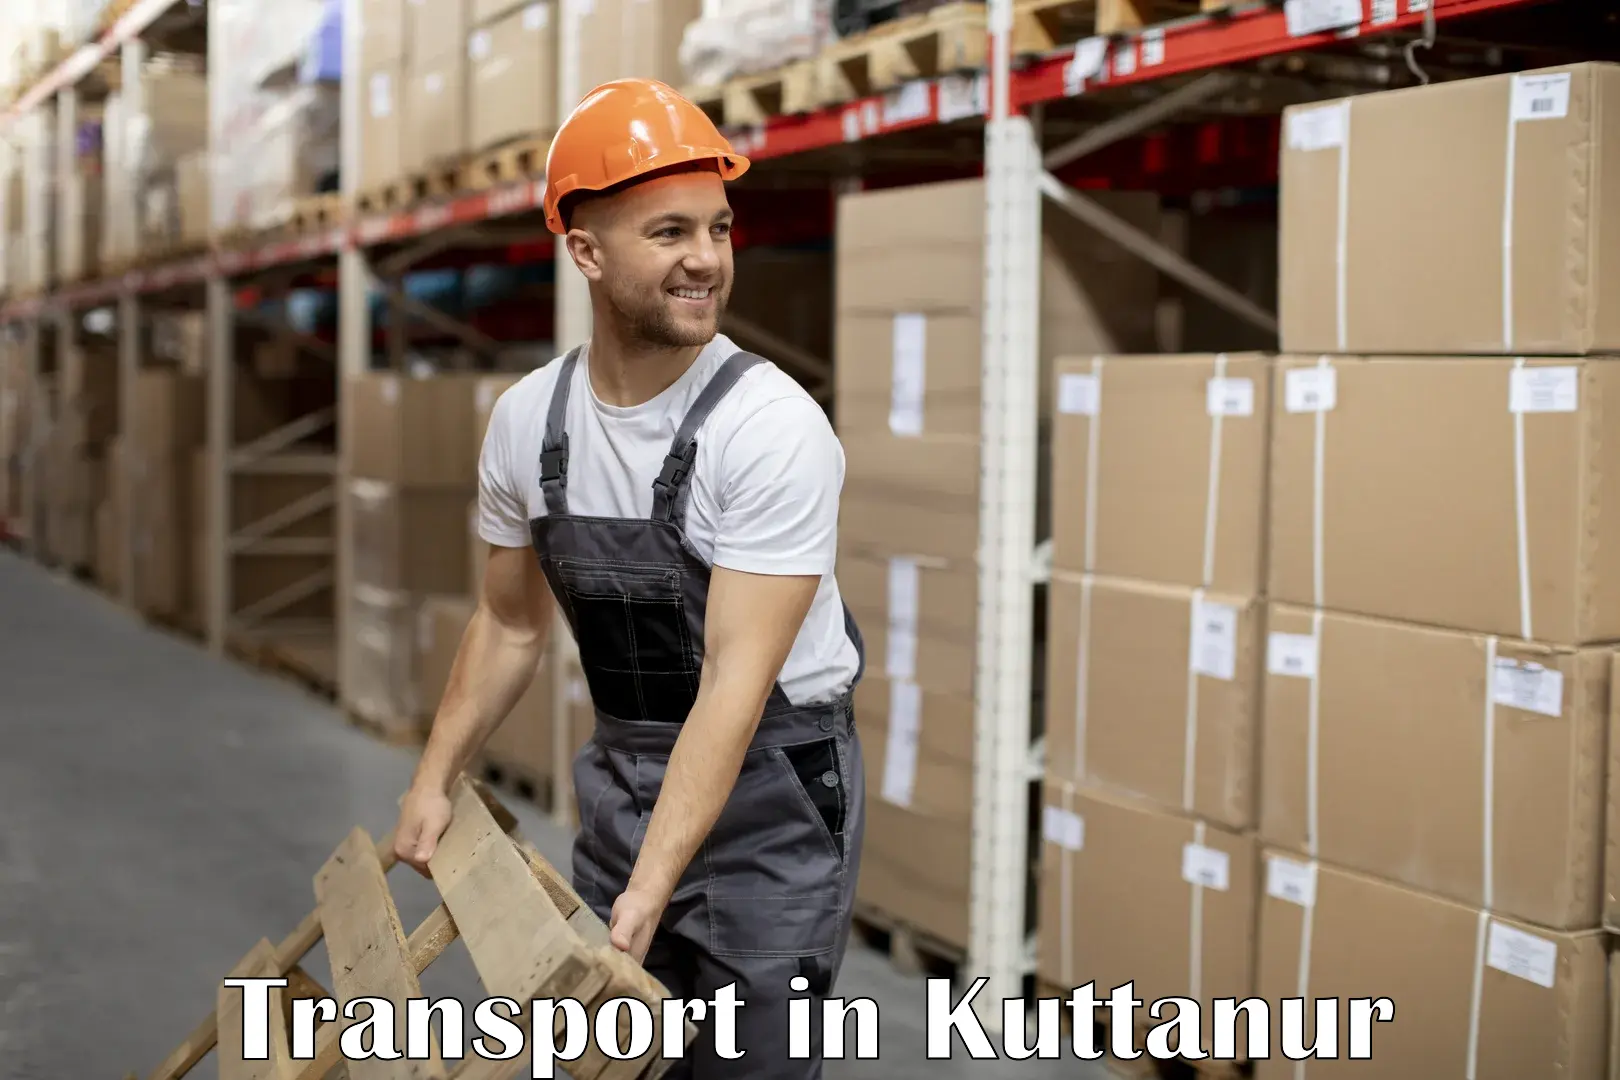 Container transportation services in Kuttanur